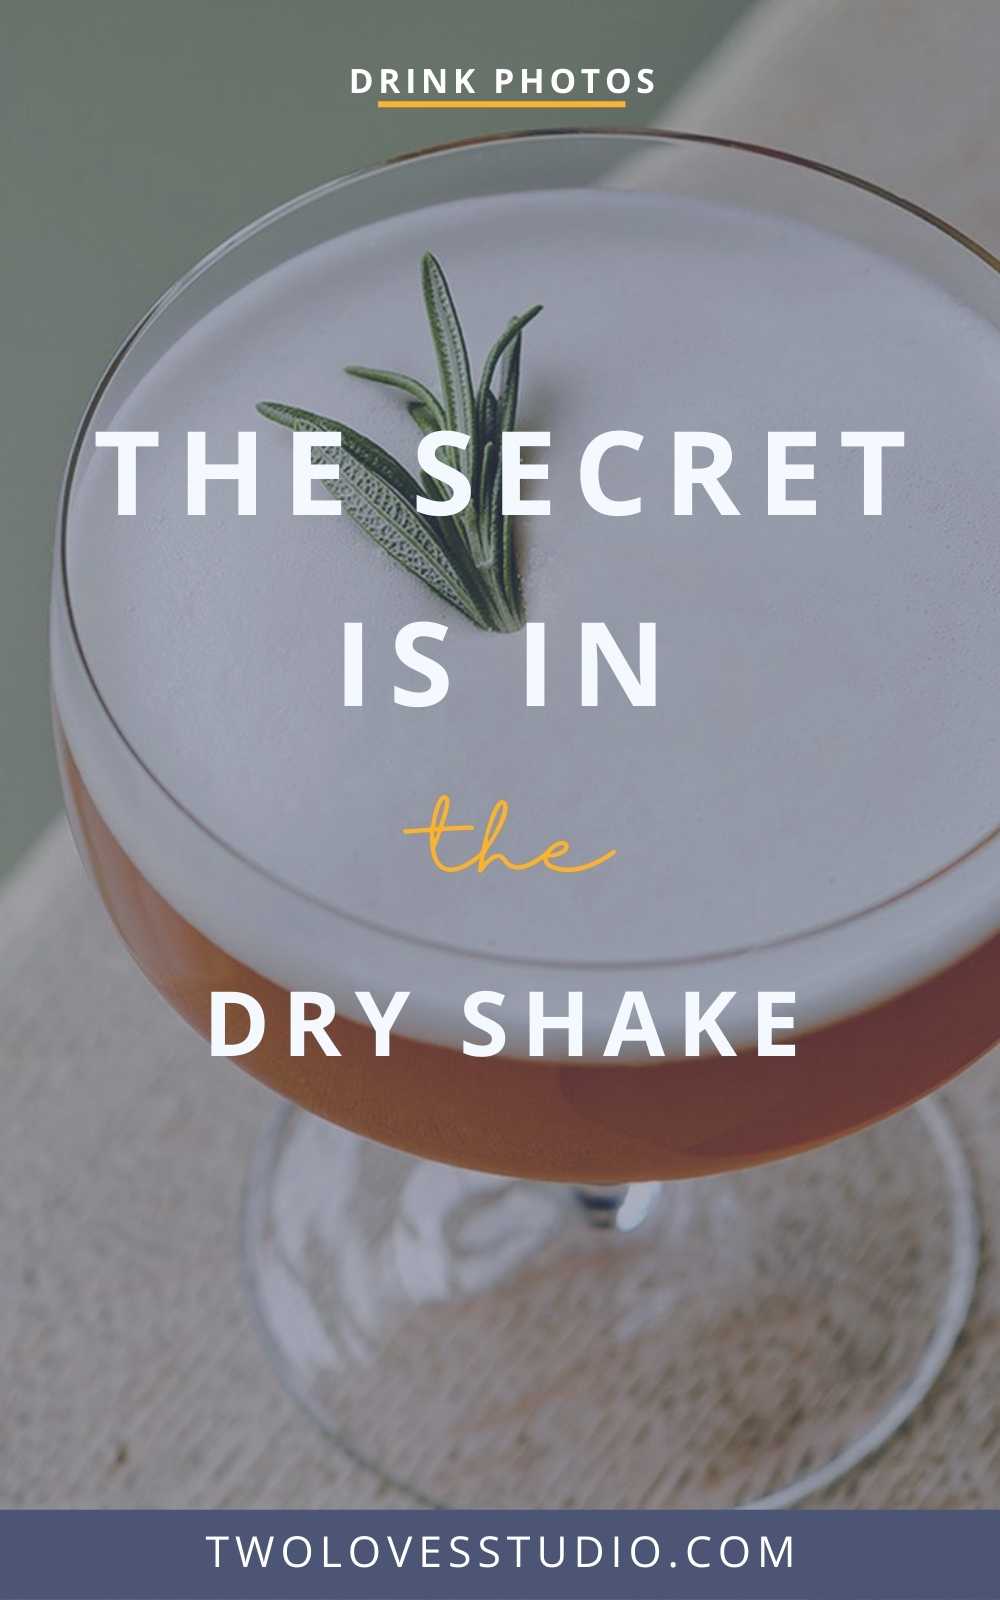 https://twolovesstudio.com/wp-content/uploads/2021/06/Dry-Shake-Cocktail-Technique-How-to-Make-the-Perfect-Foam-For-Cocktails_3.jpg